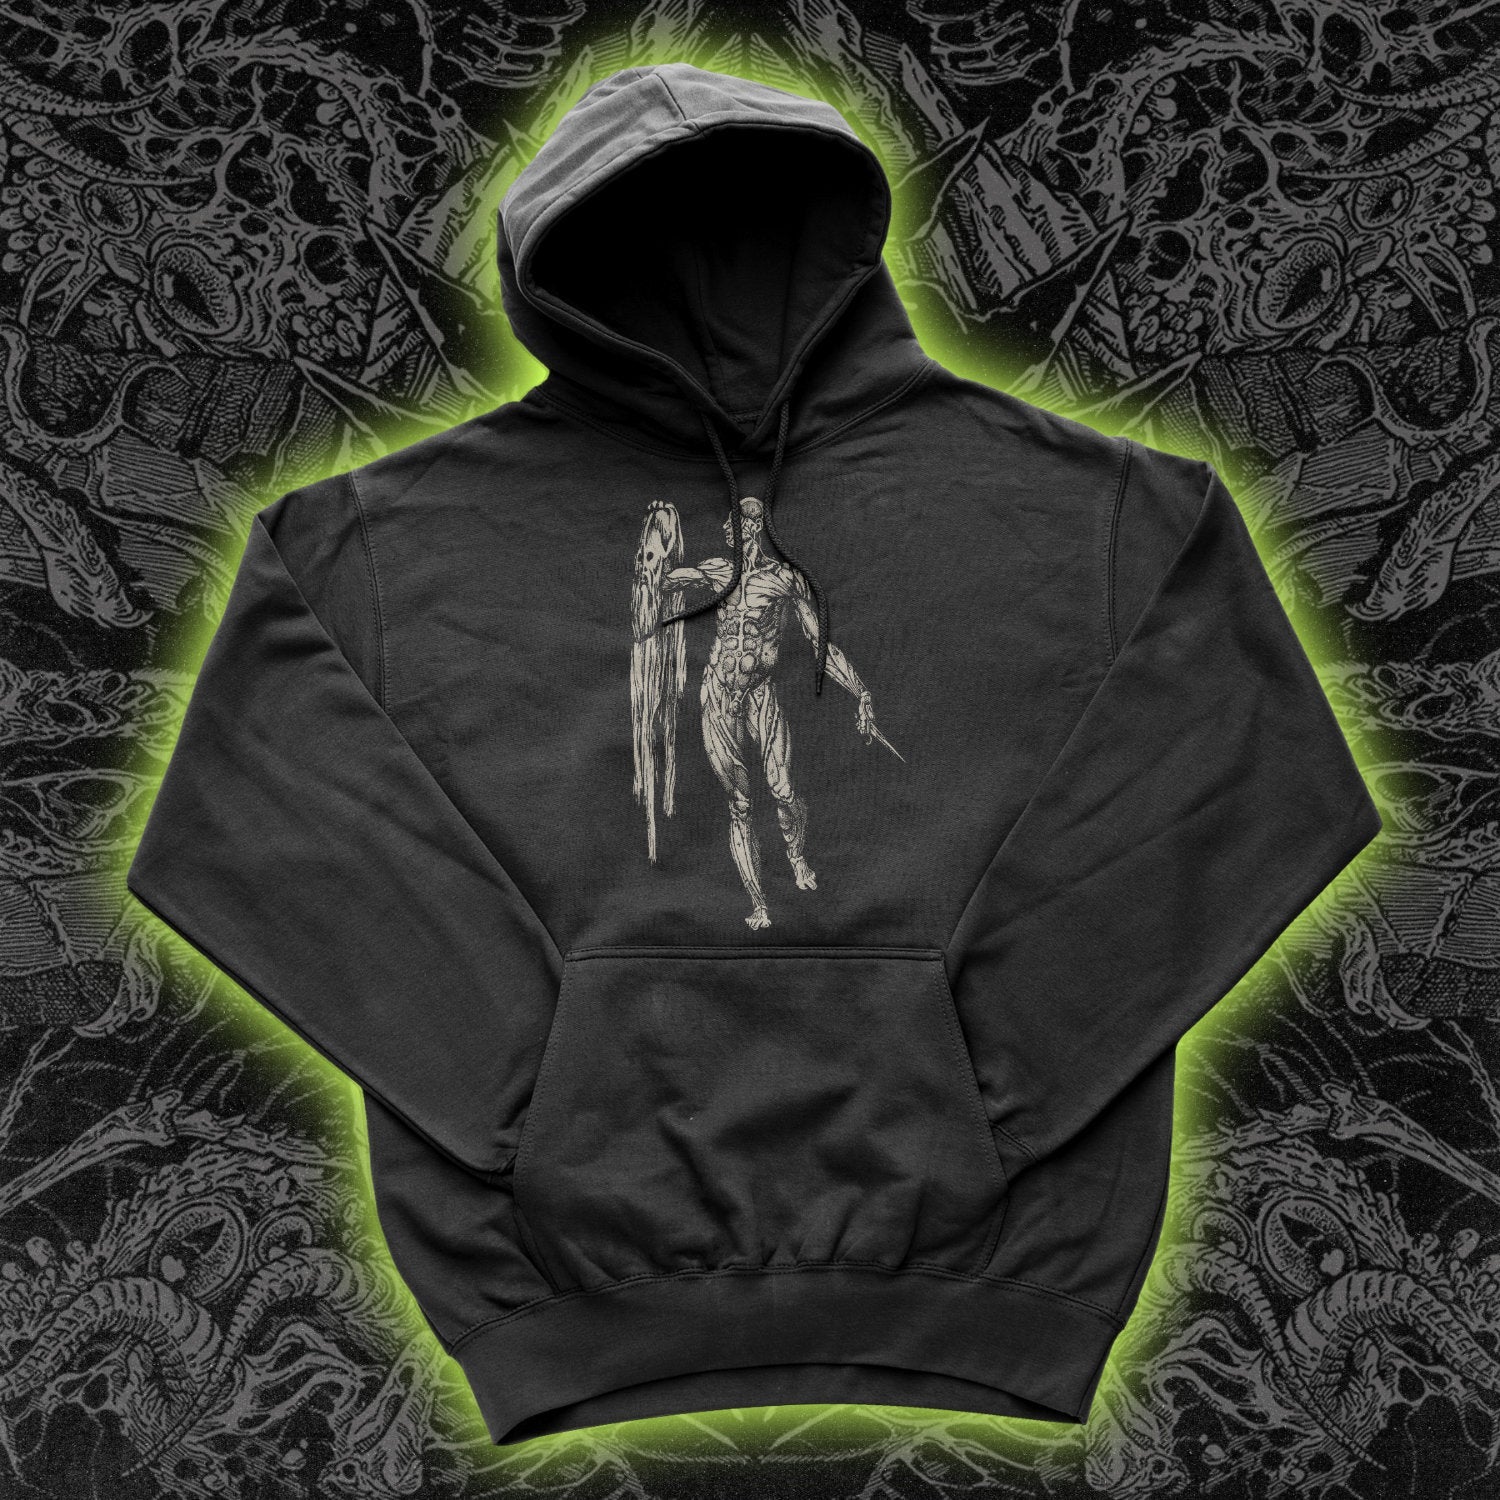 Take Off Your Skin Hoodie